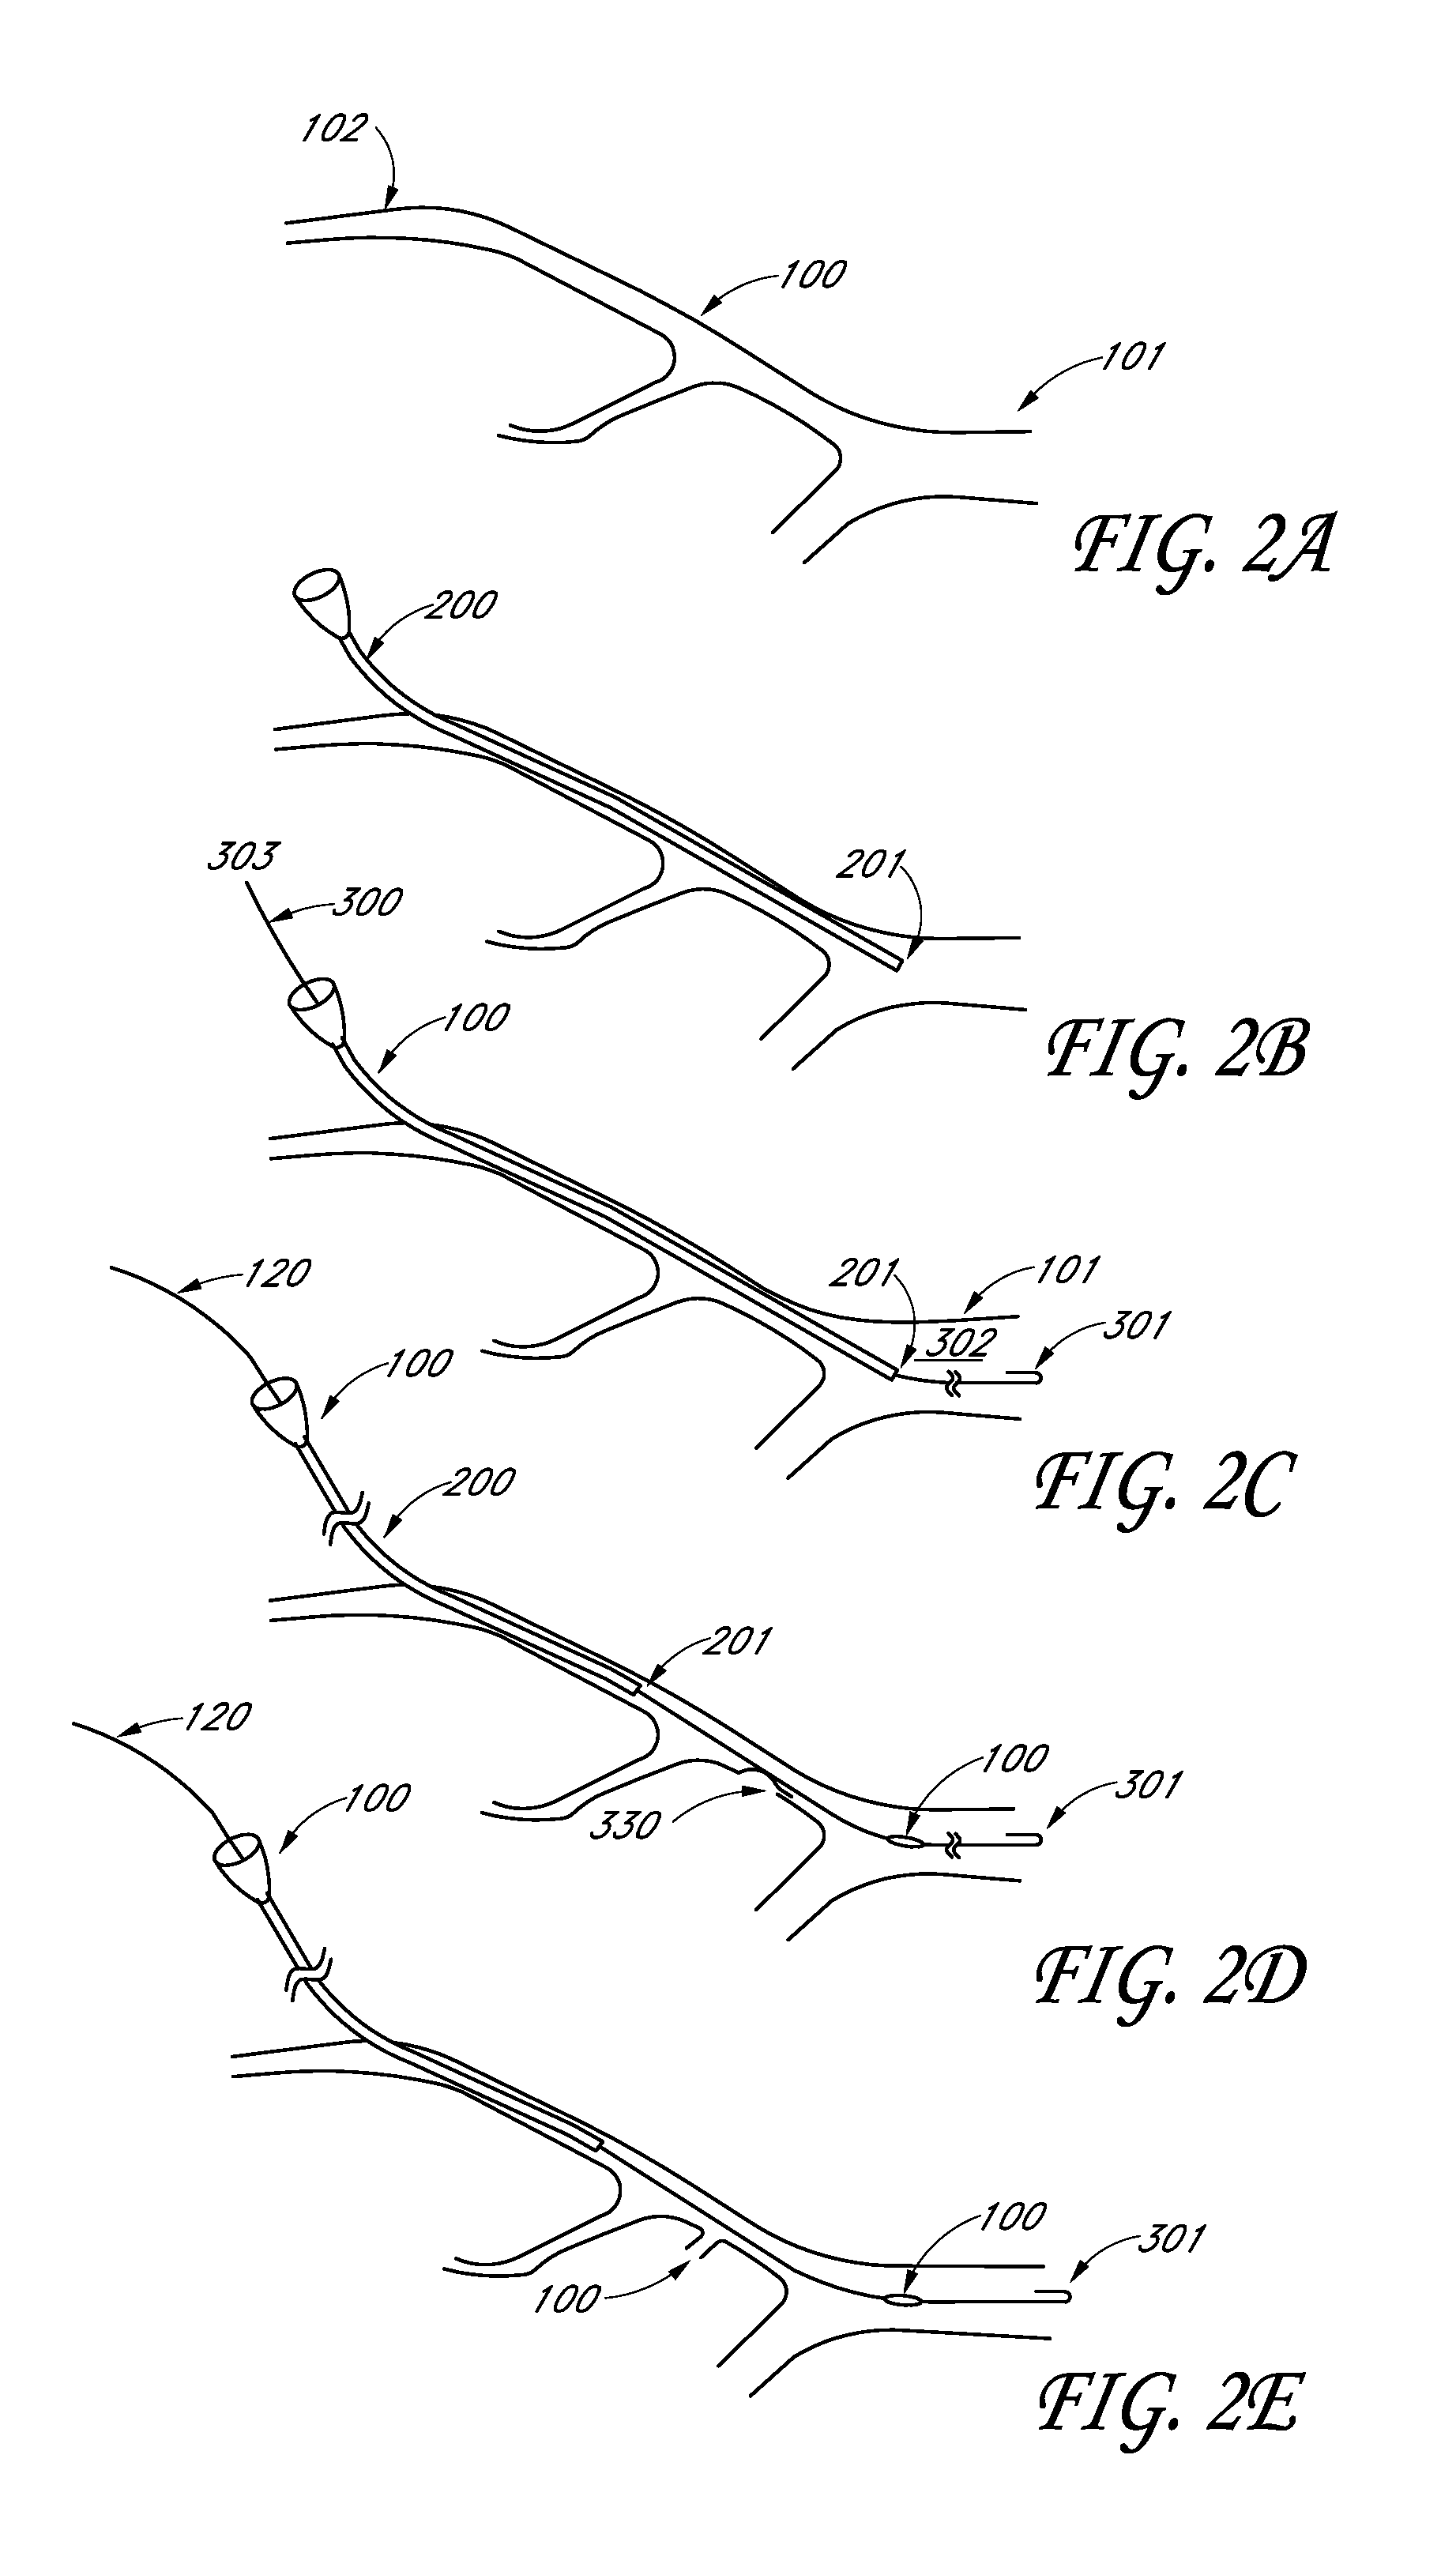 Method and devices for flow occlusion during device exchanges